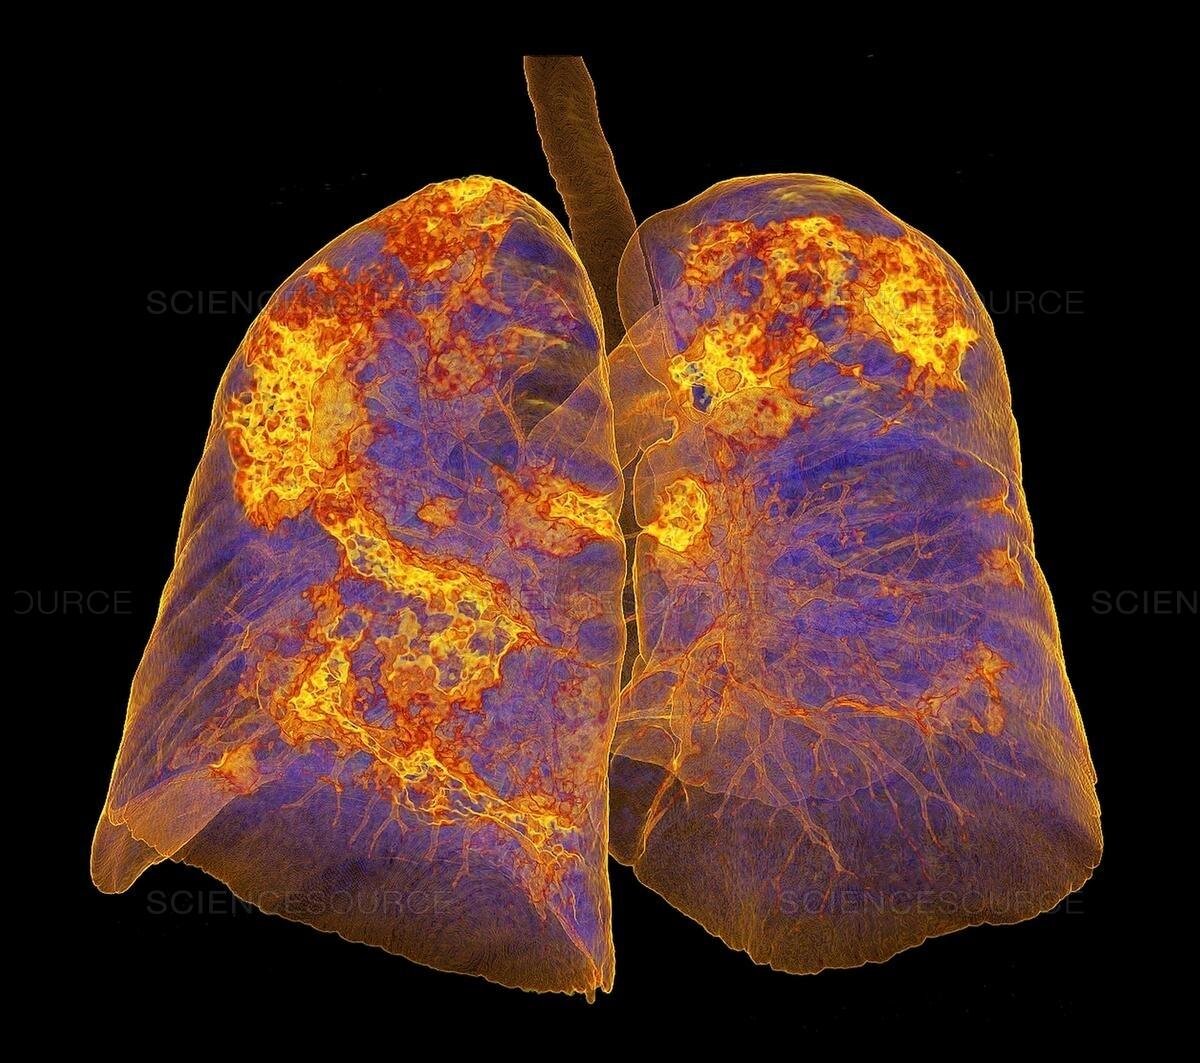 Lungs Affected by COVID-19 Atypical Pneumonia, 3D CT Scan